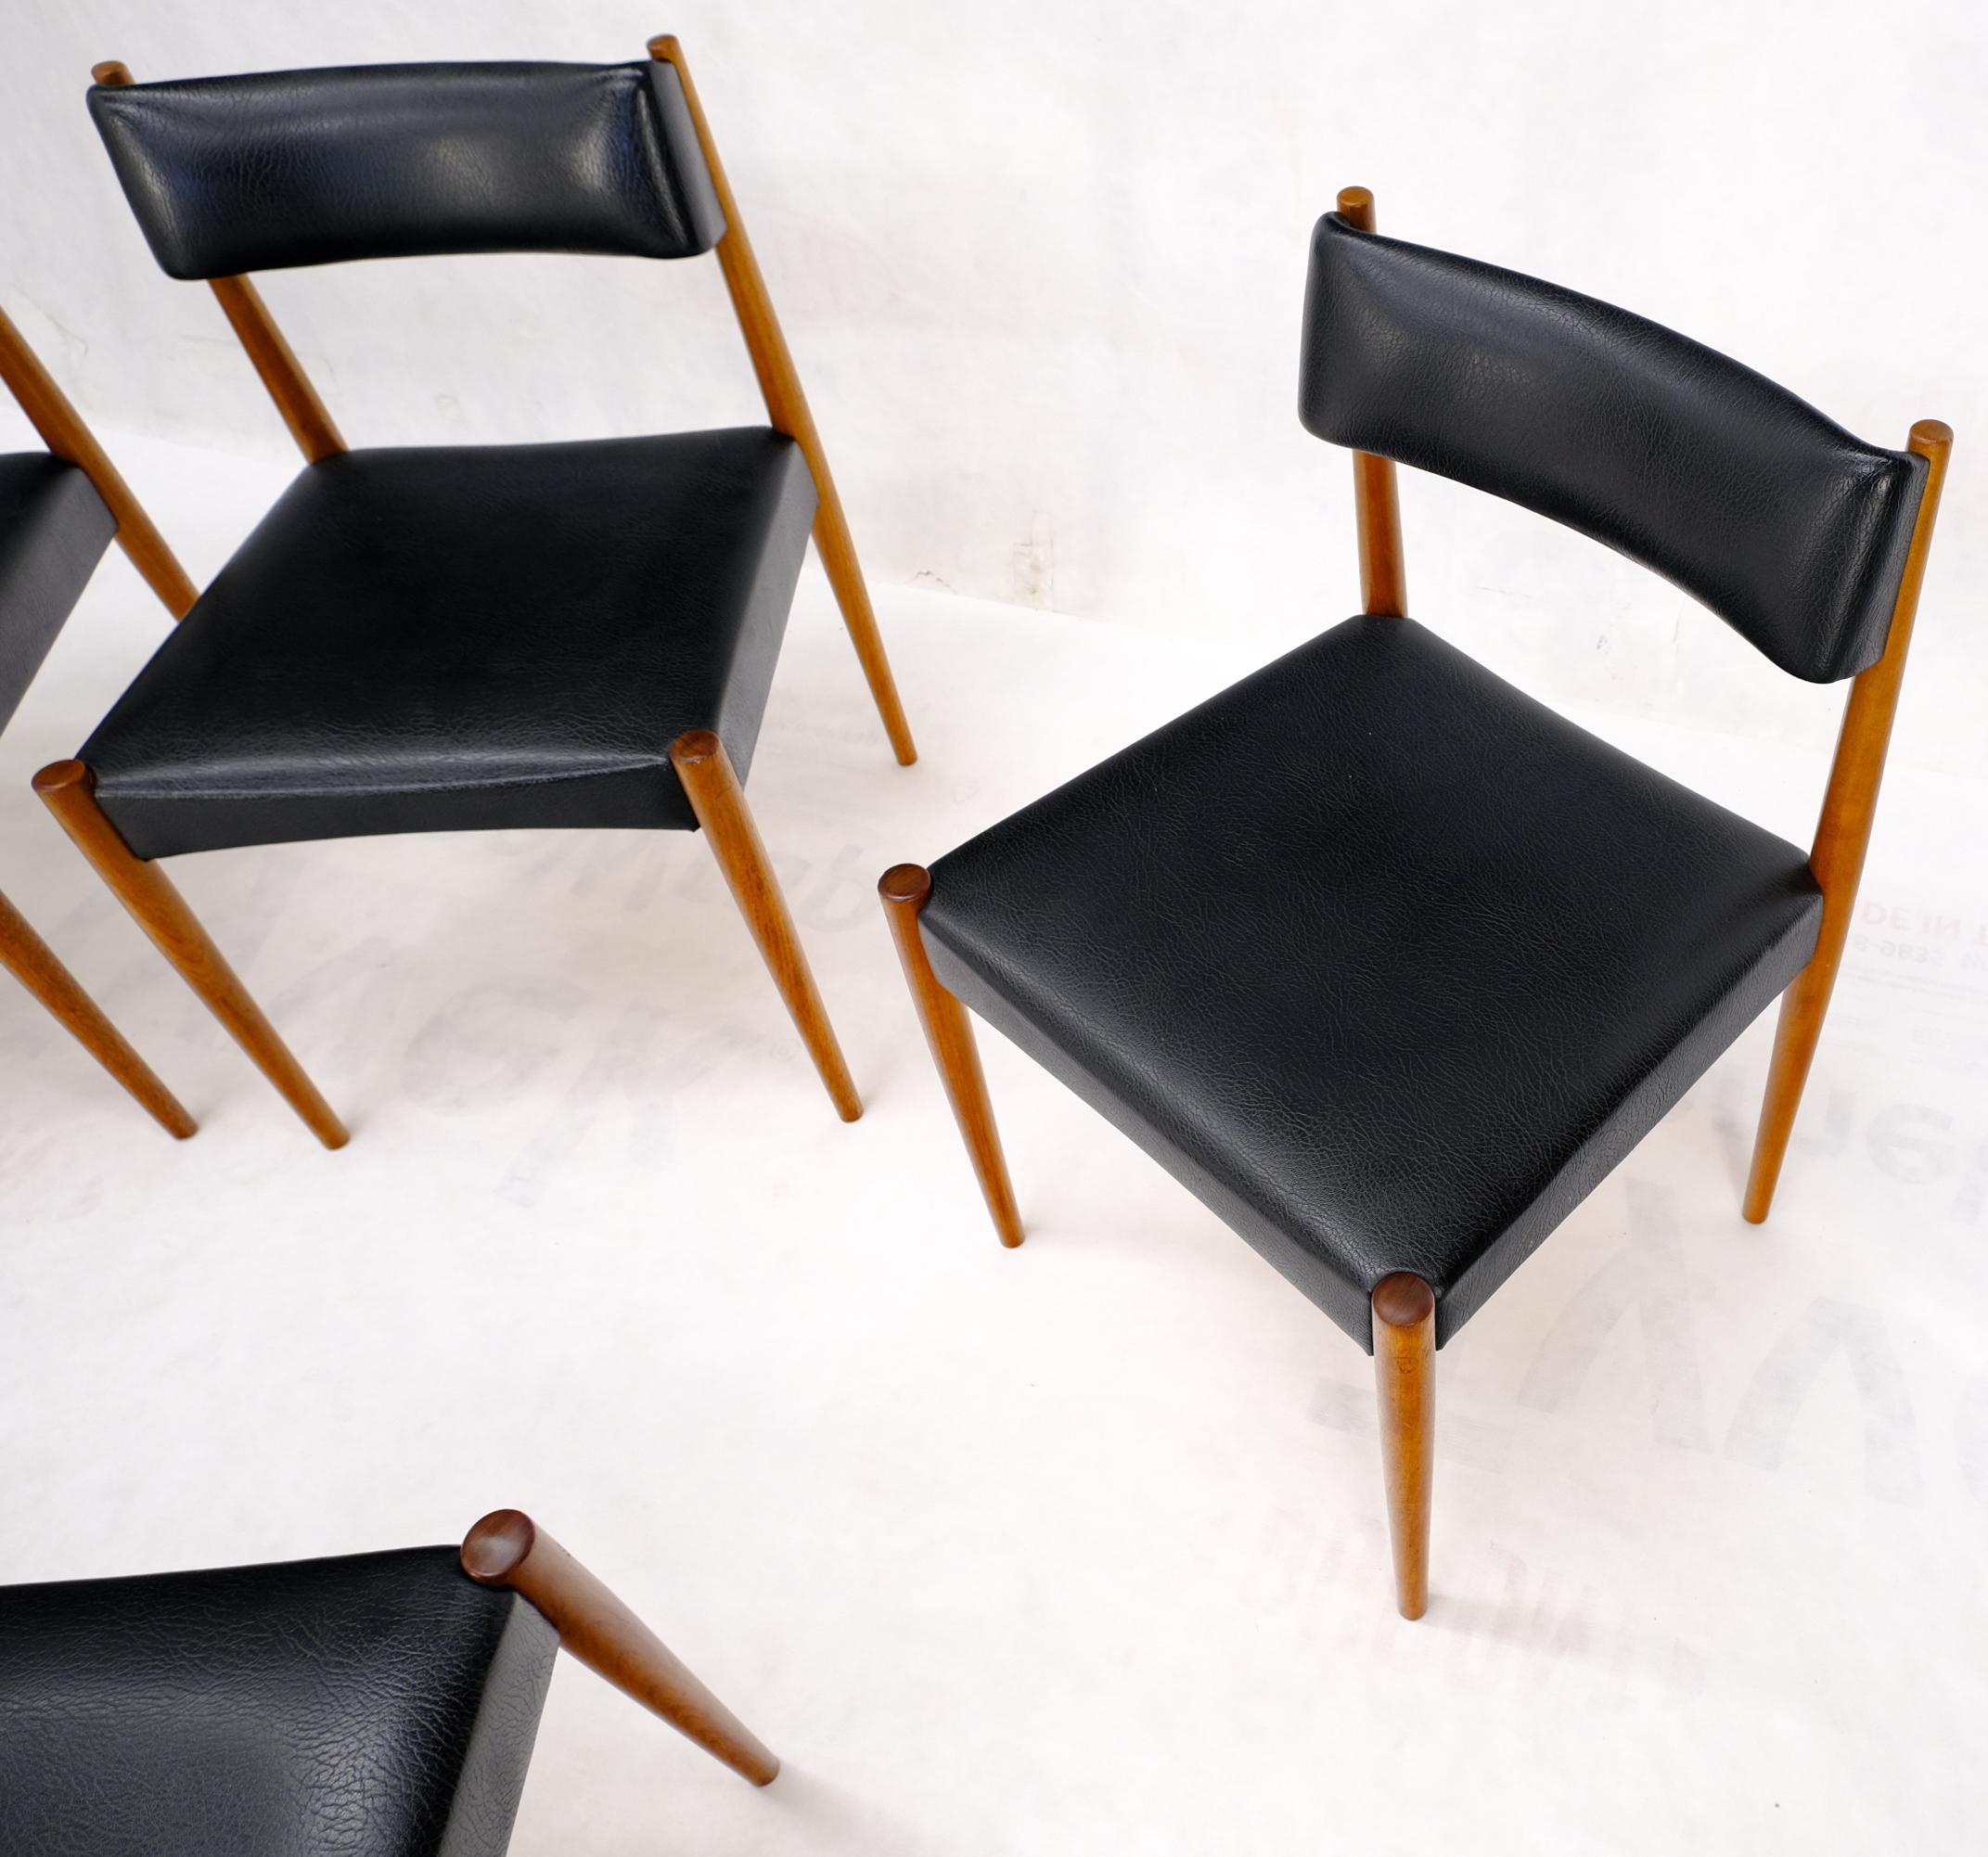 Set of 6 Danish Teak Mid Century Modern Dining Chairs in Black Upholstery For Sale 2